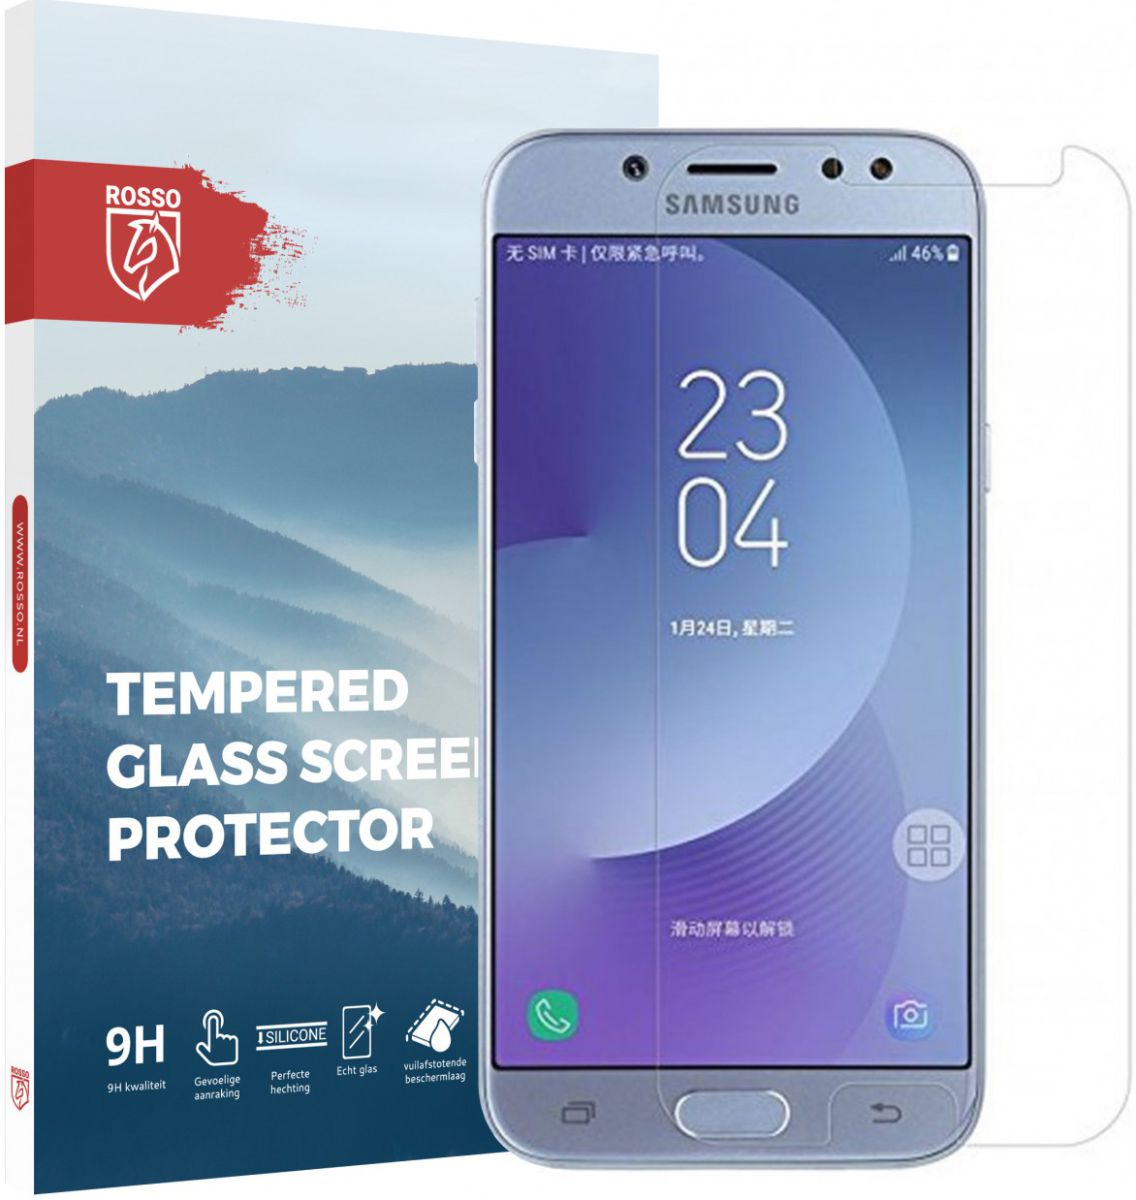 Rosso Samsung J5 2017 9H Tempered Glass Screen Protector | GSMpunt.nl